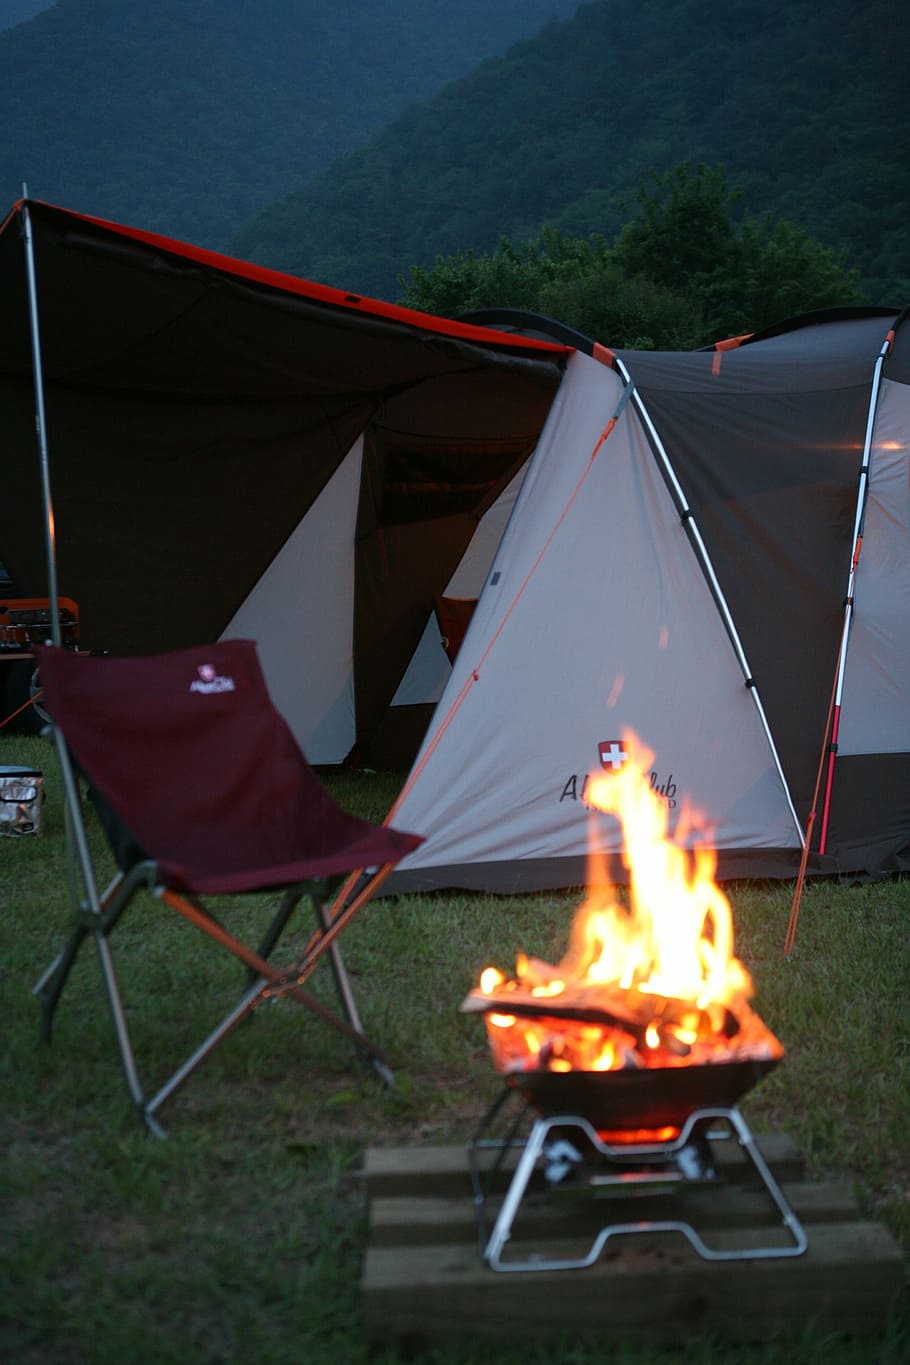 fire, bonfire, camping, flame, burning, nature, heat - temperature, fire - natural phenomenon, tent, chair